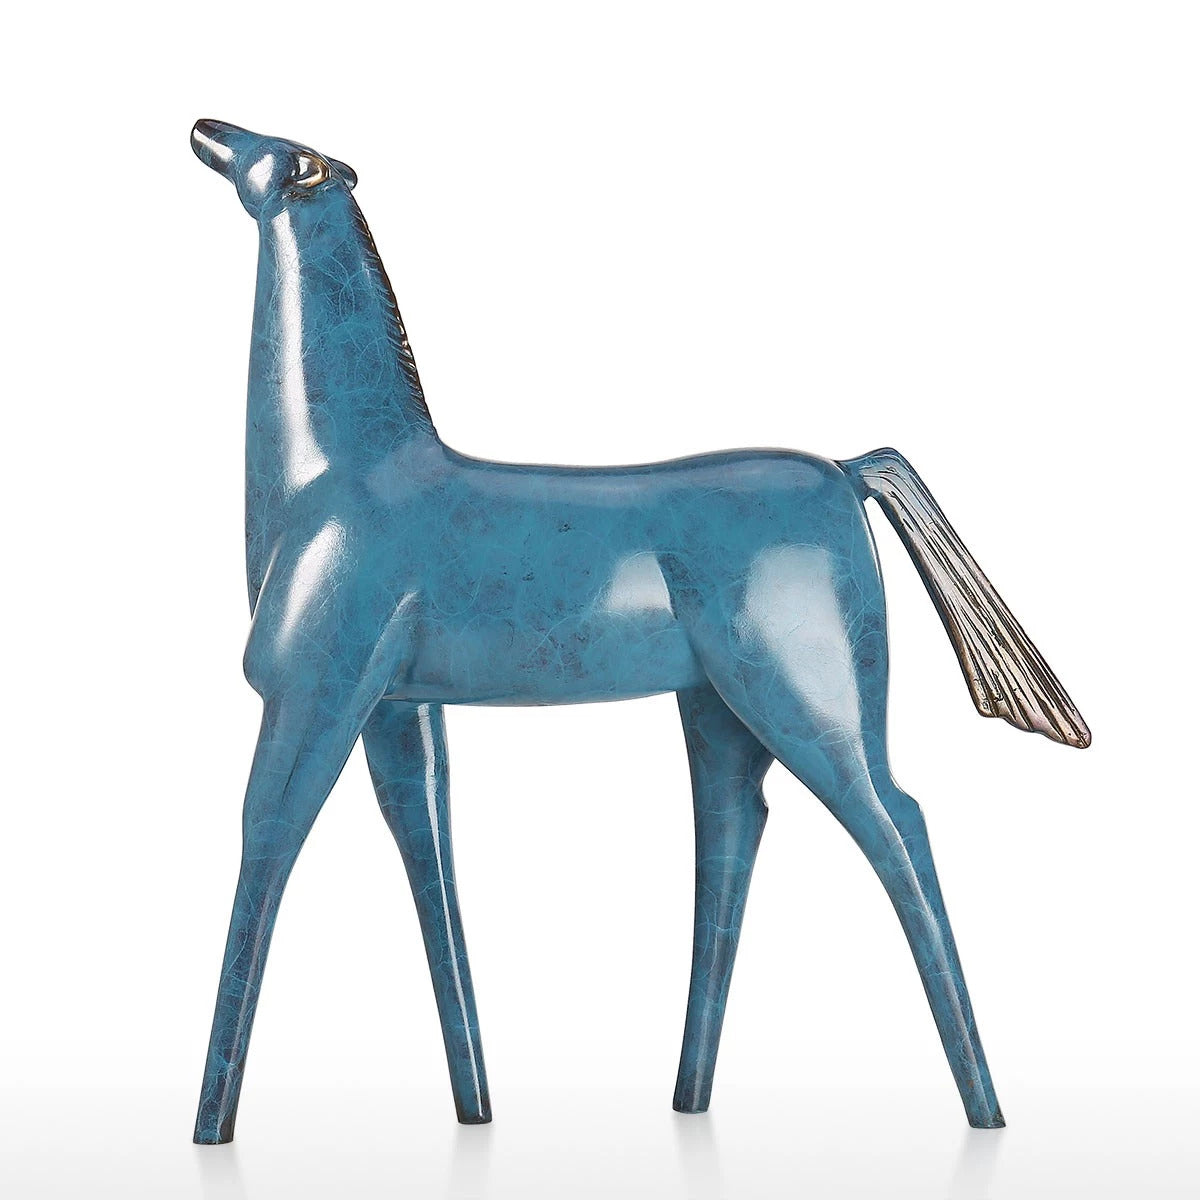 Horse Statue For Horse Decor and Gifts